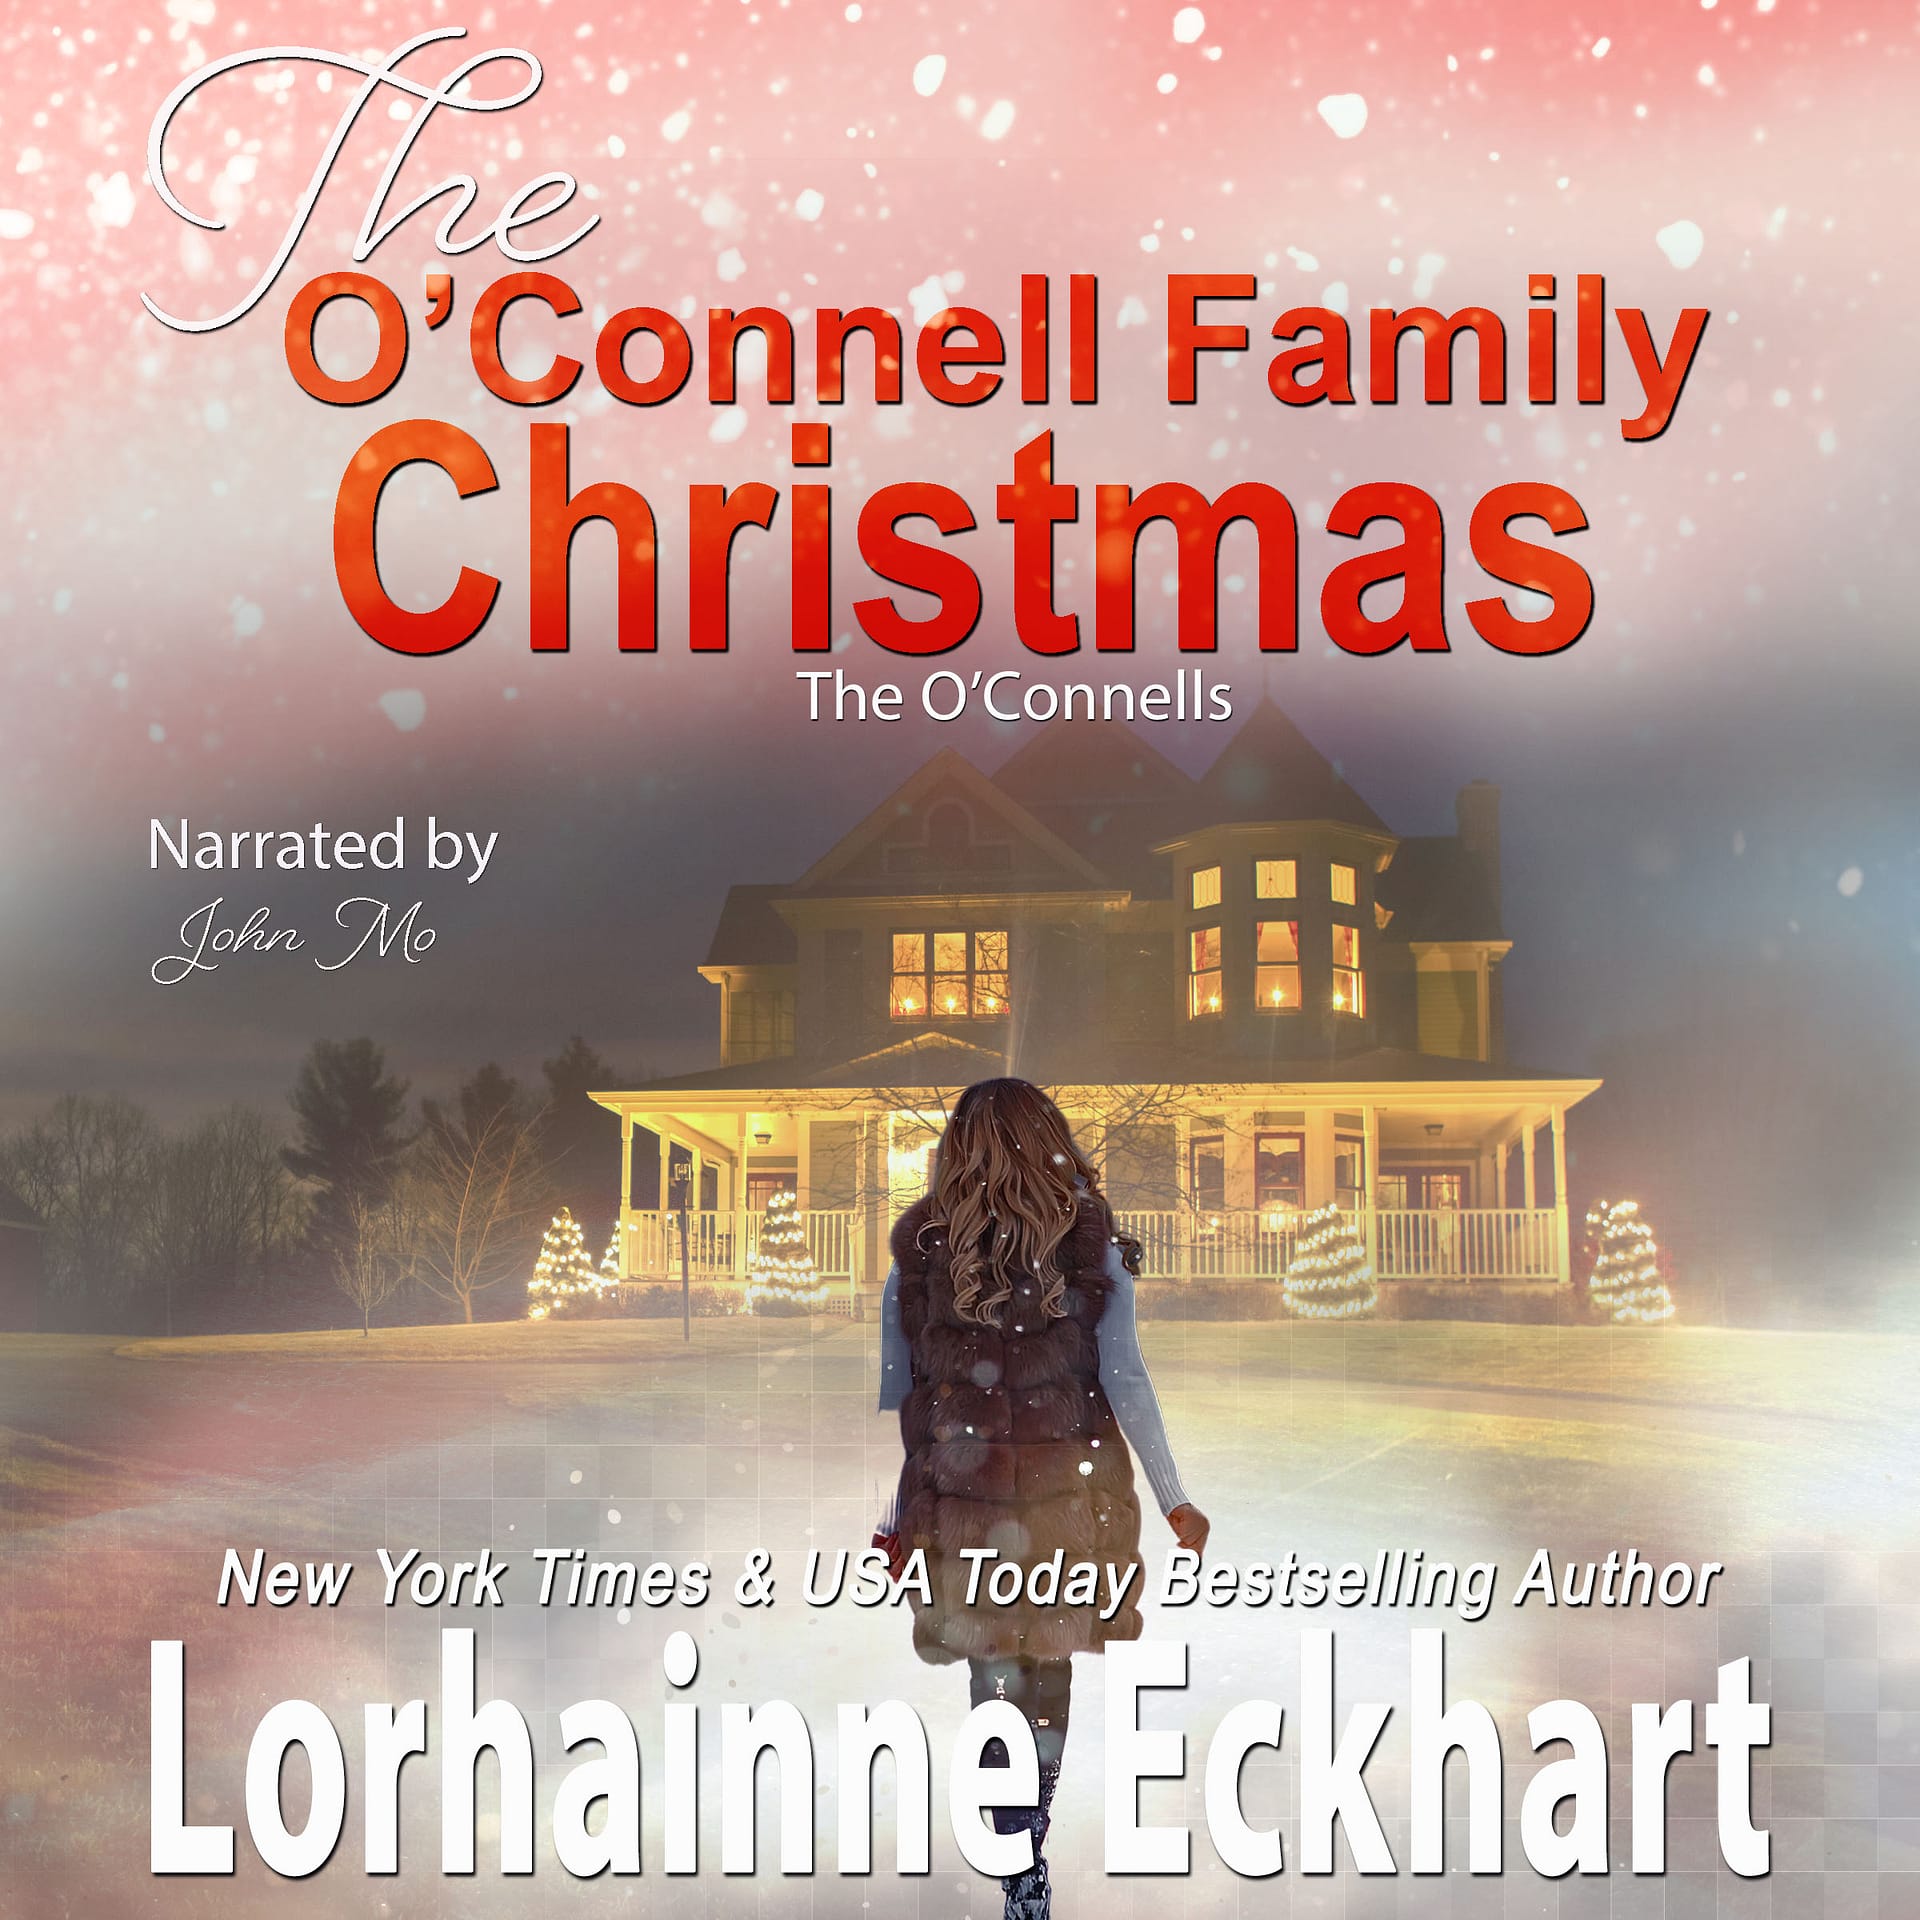 The O’Connell Family Christmas Audiobook